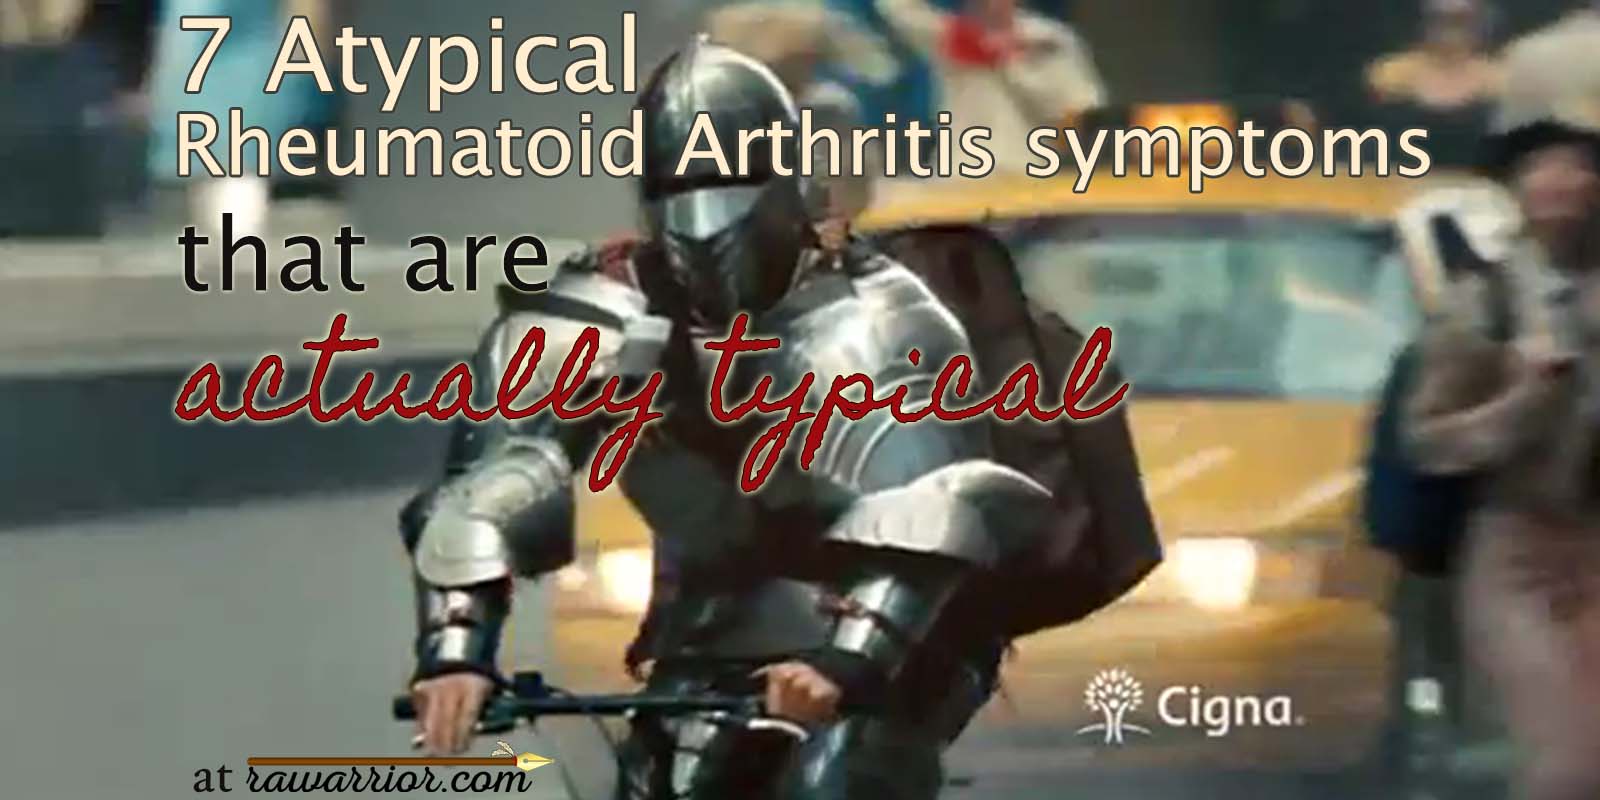 7 Atypical Rheumatoid Arthritis Effects Are Actually Typical